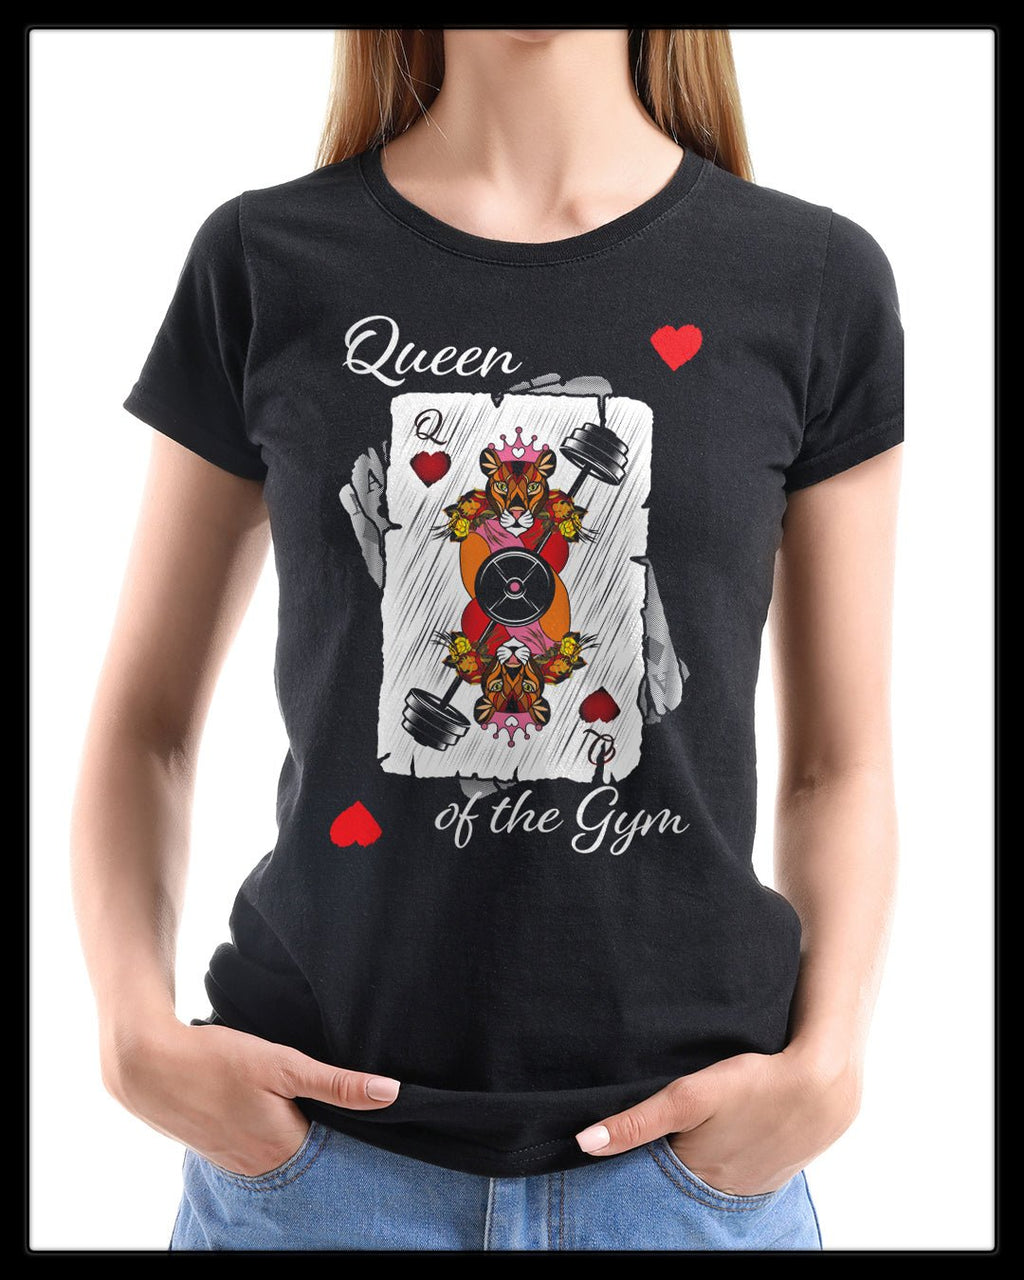 Queen of the Gym on Black Unisex Tee - Cleekers